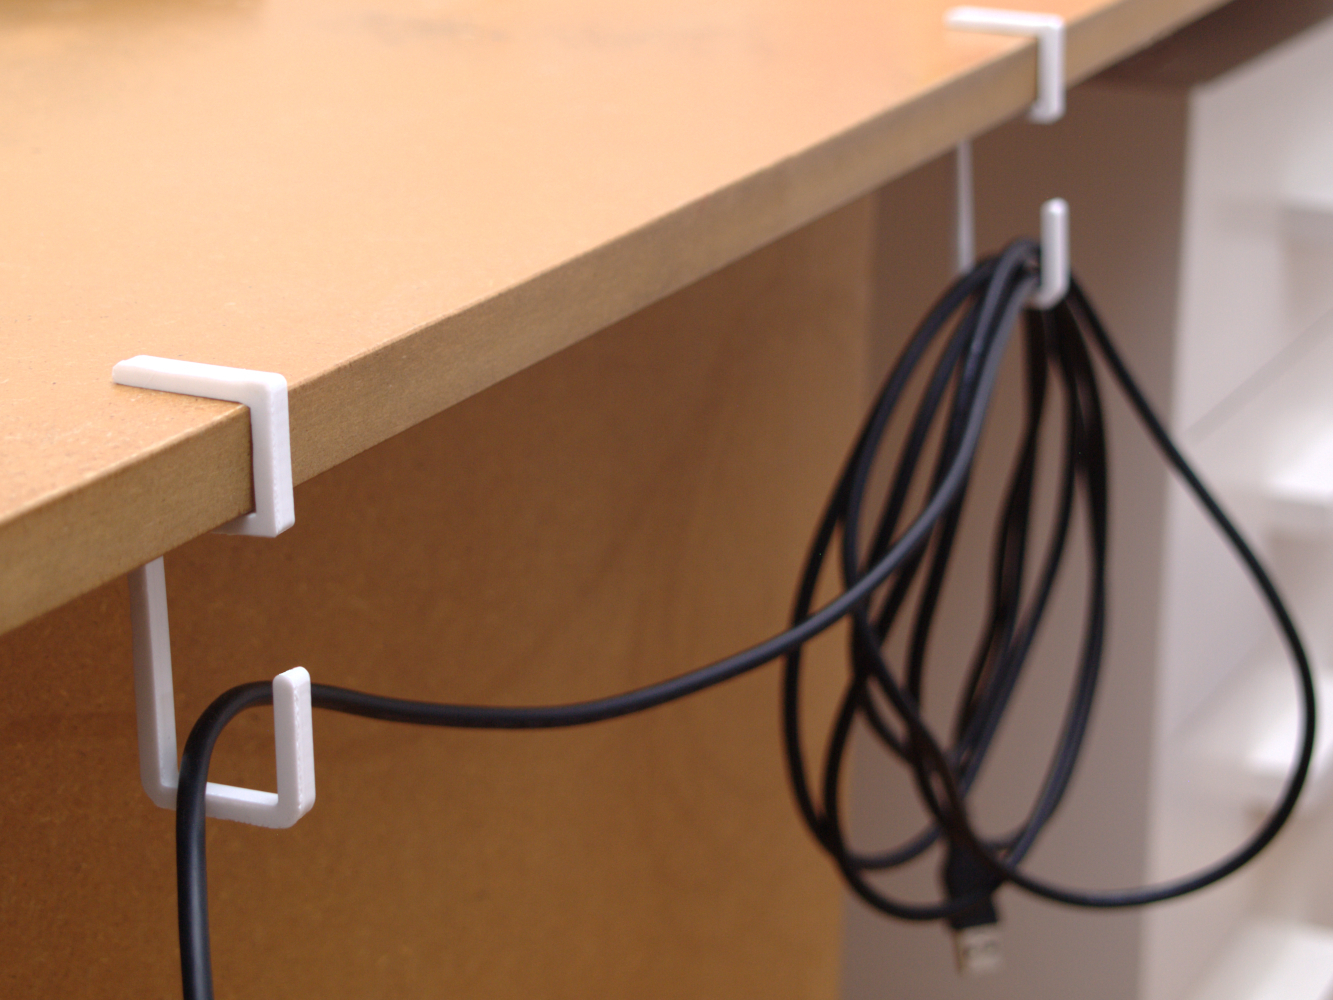 3D Printed Cable Hook for Desk by Florian Artmann